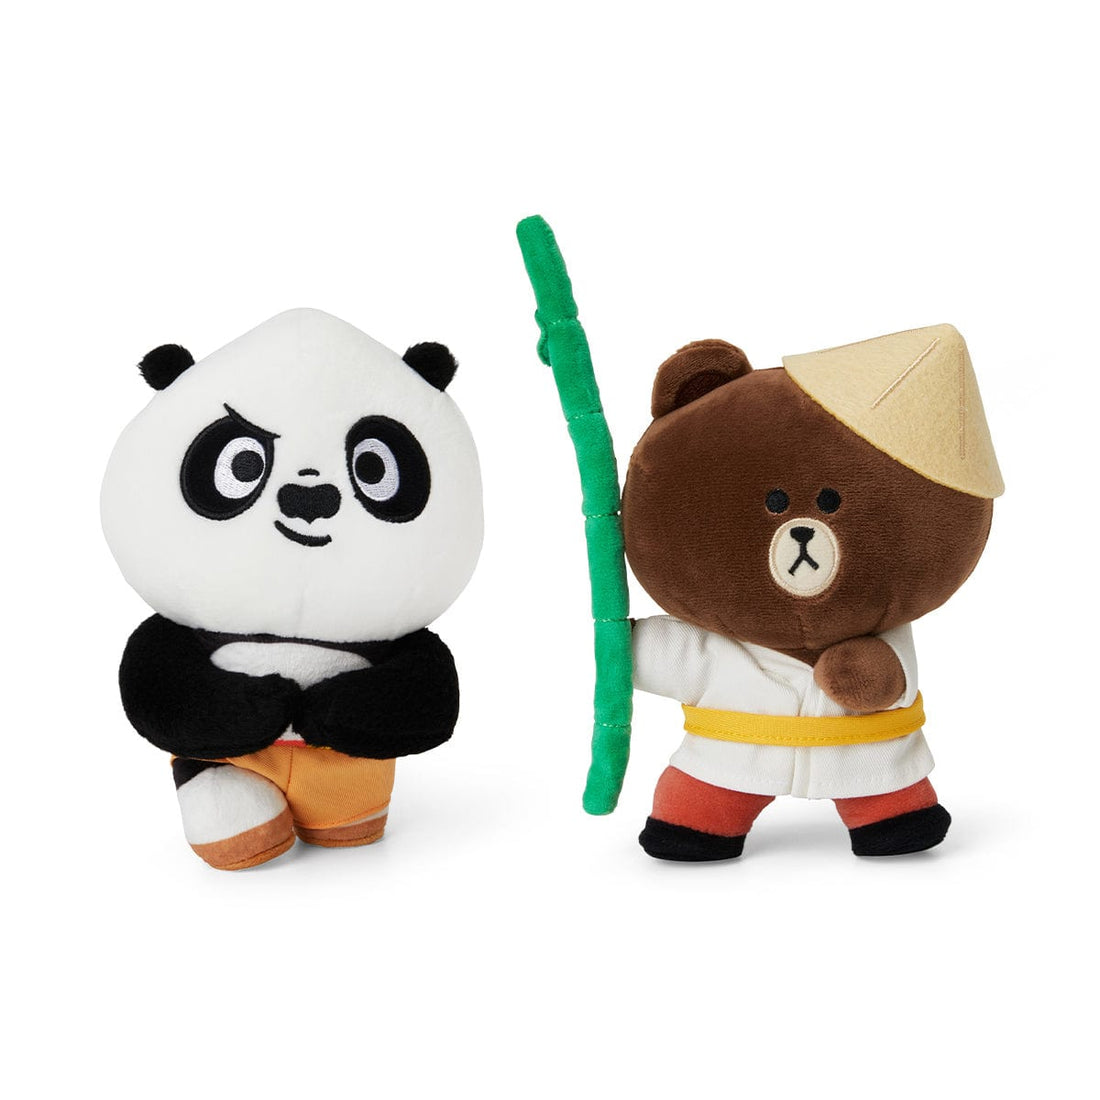 LINE FRIENDS TOYS BROWN & PO MINI STANDING DOLL SET LINE FRIENDS | KUNG FU PANDA BROWN & PO MINI STANDING DOLL SET